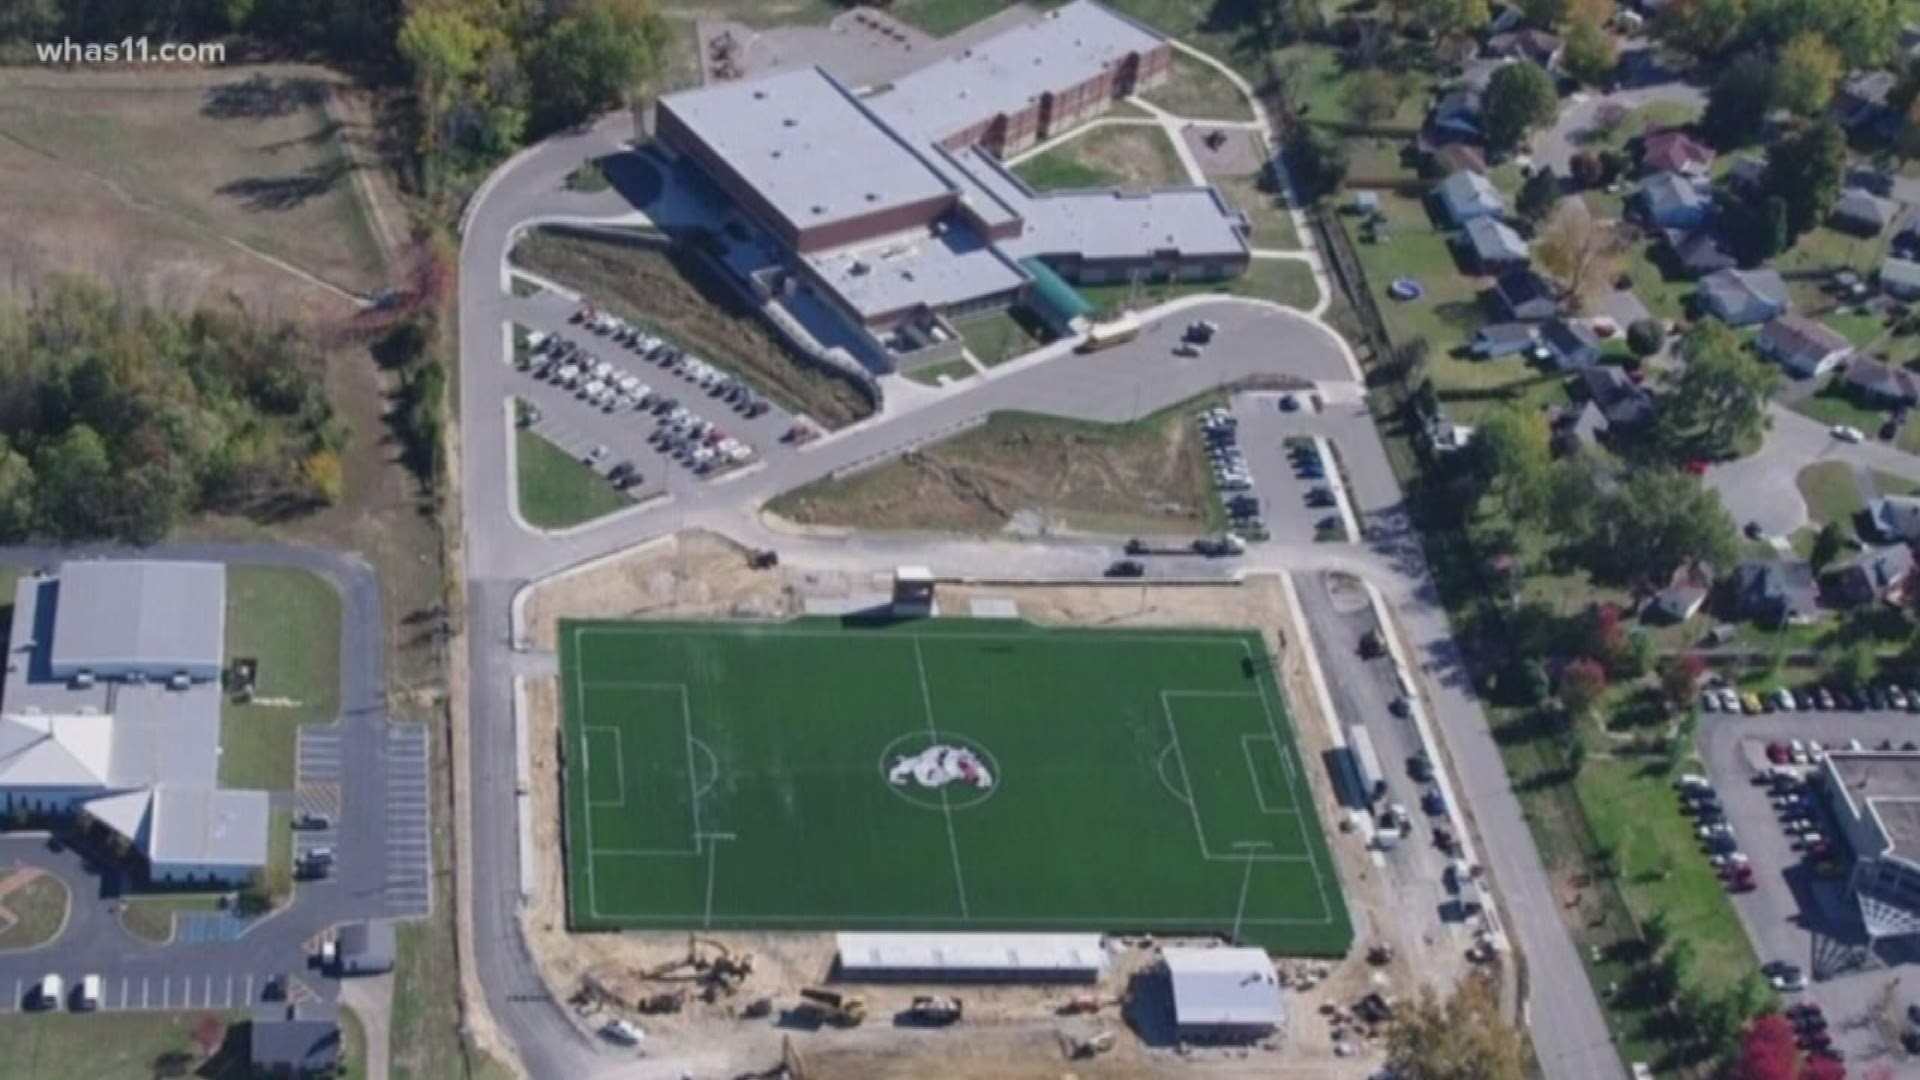 The New Albany High School boys alumni soccer game is on Nov. 30, 2019 at the brand new soccer field off Green Valley Road in New Albany. The game starts at 5 PM.